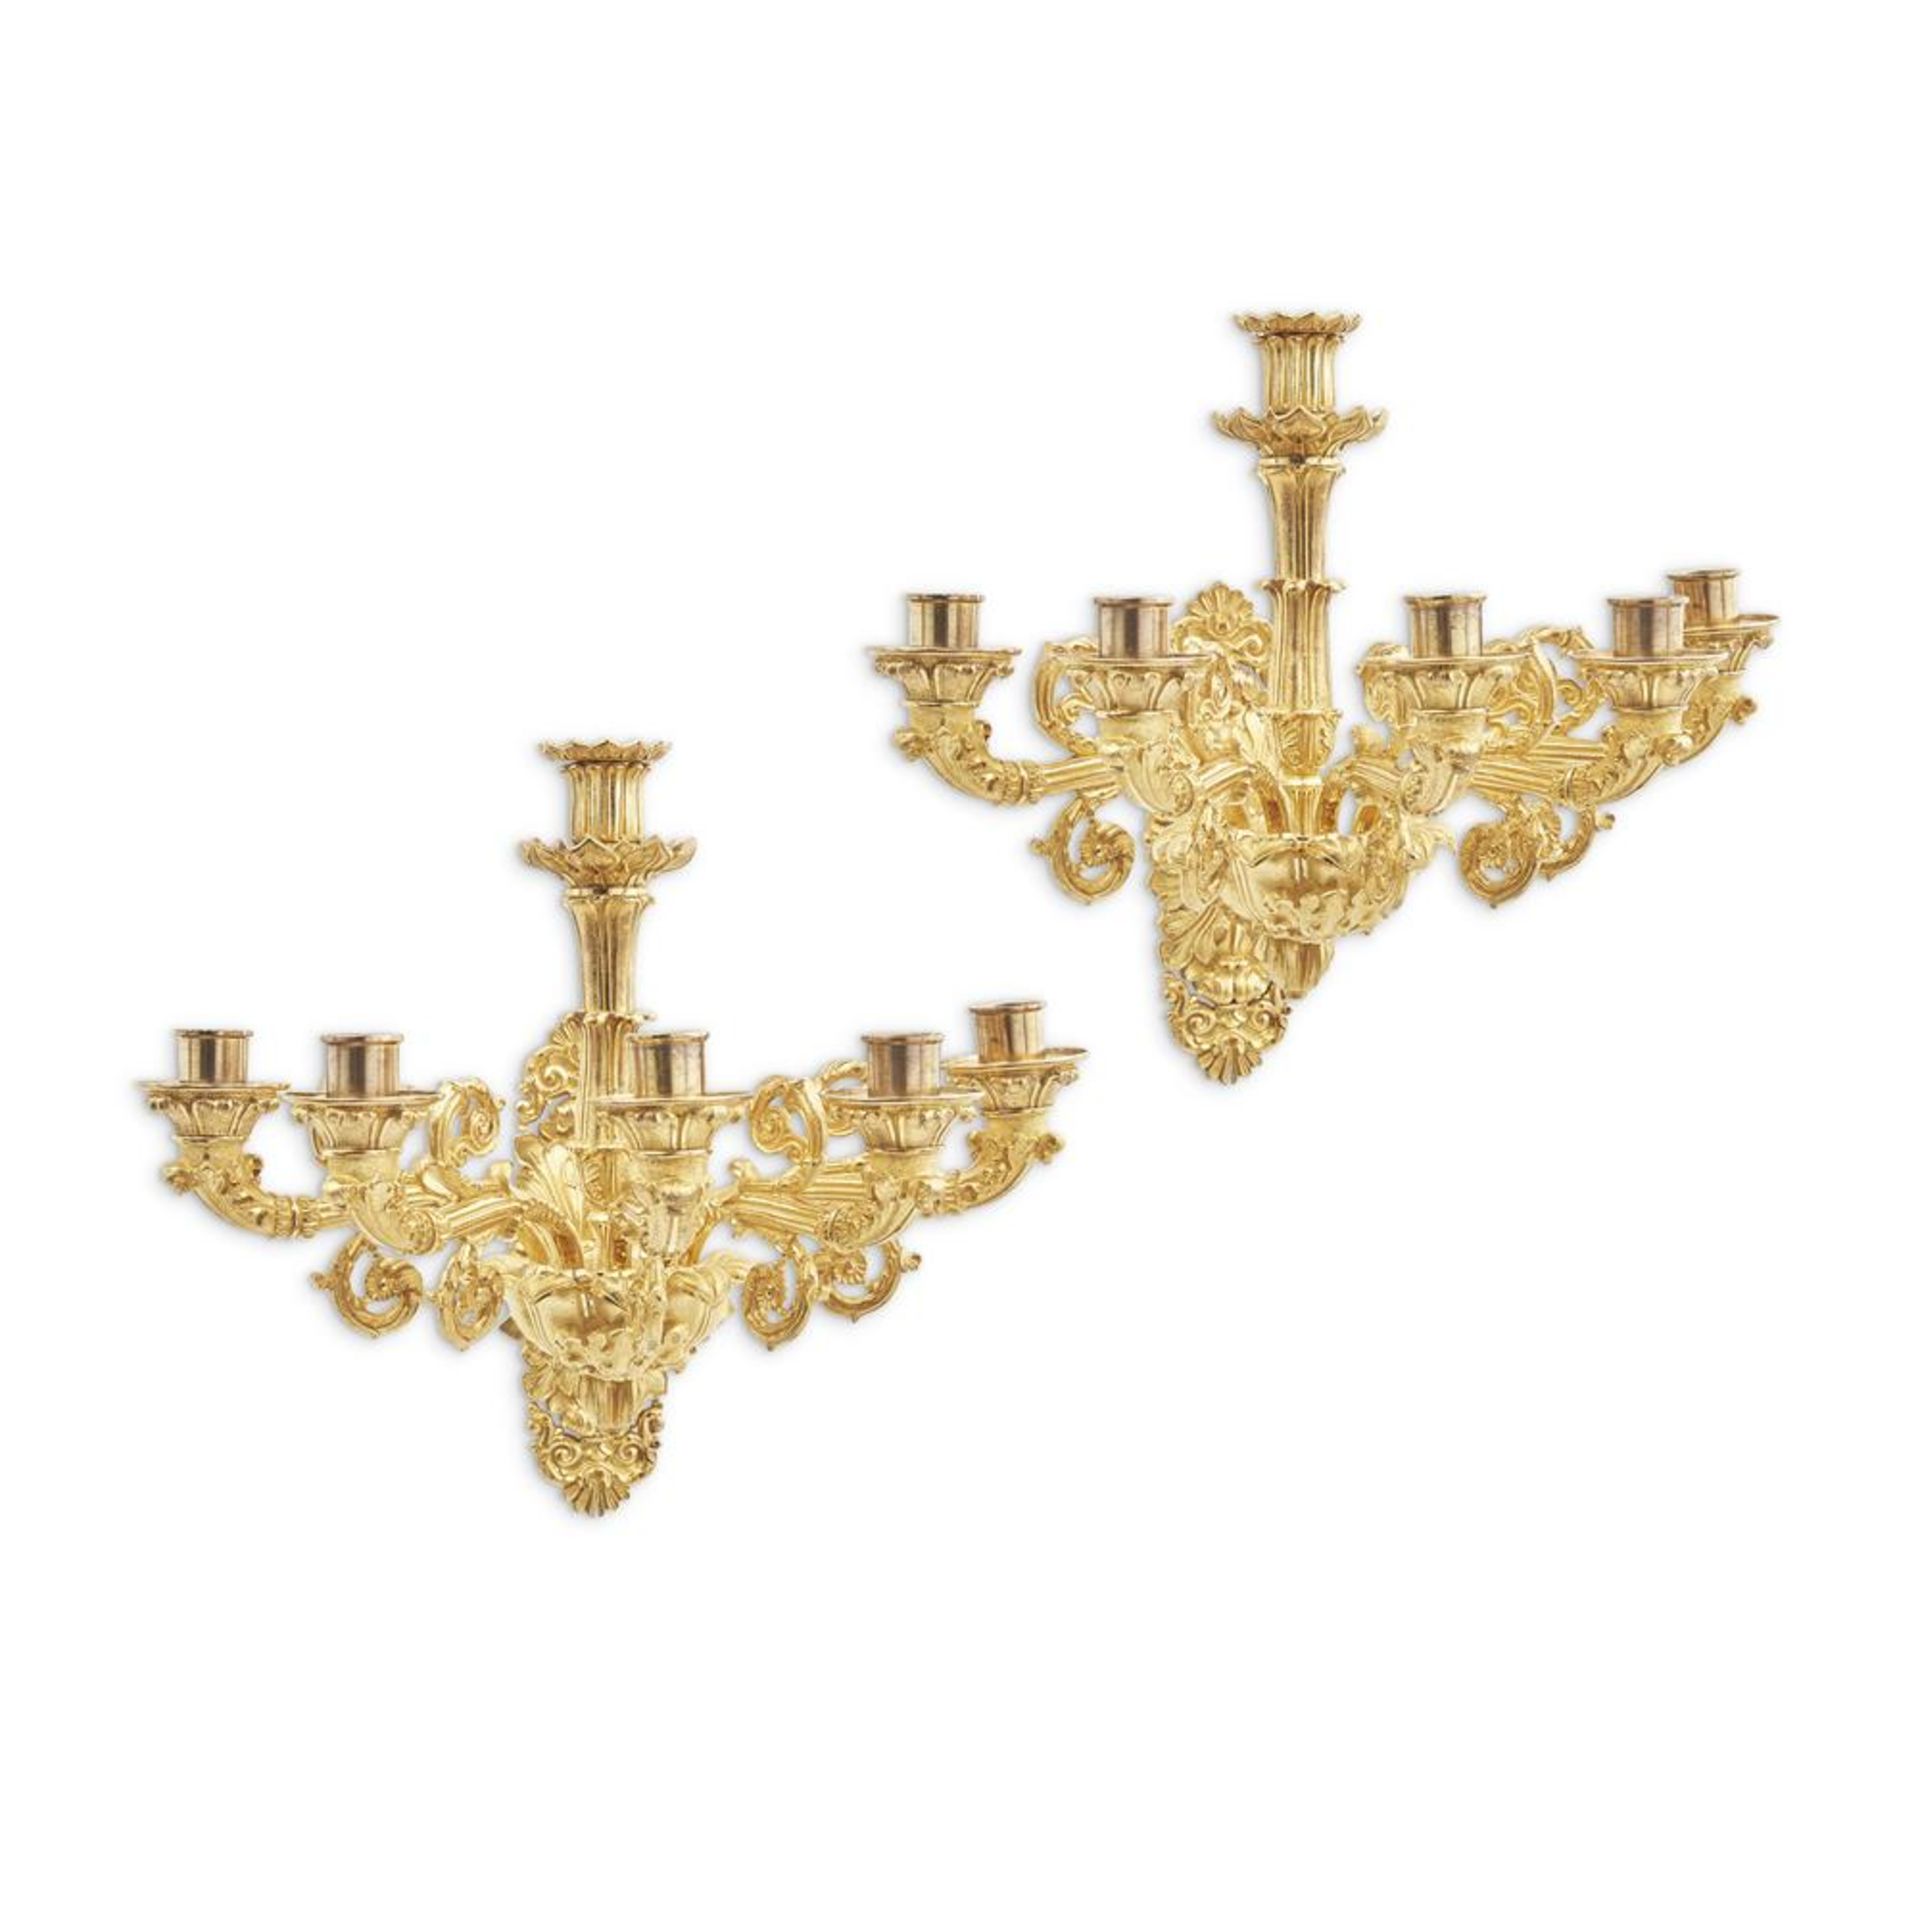 A PAIR OF CHARLES X ORMOLU FIVE LIGHT WALL APPLIQUES FRENCH, CIRCA 1835/1845